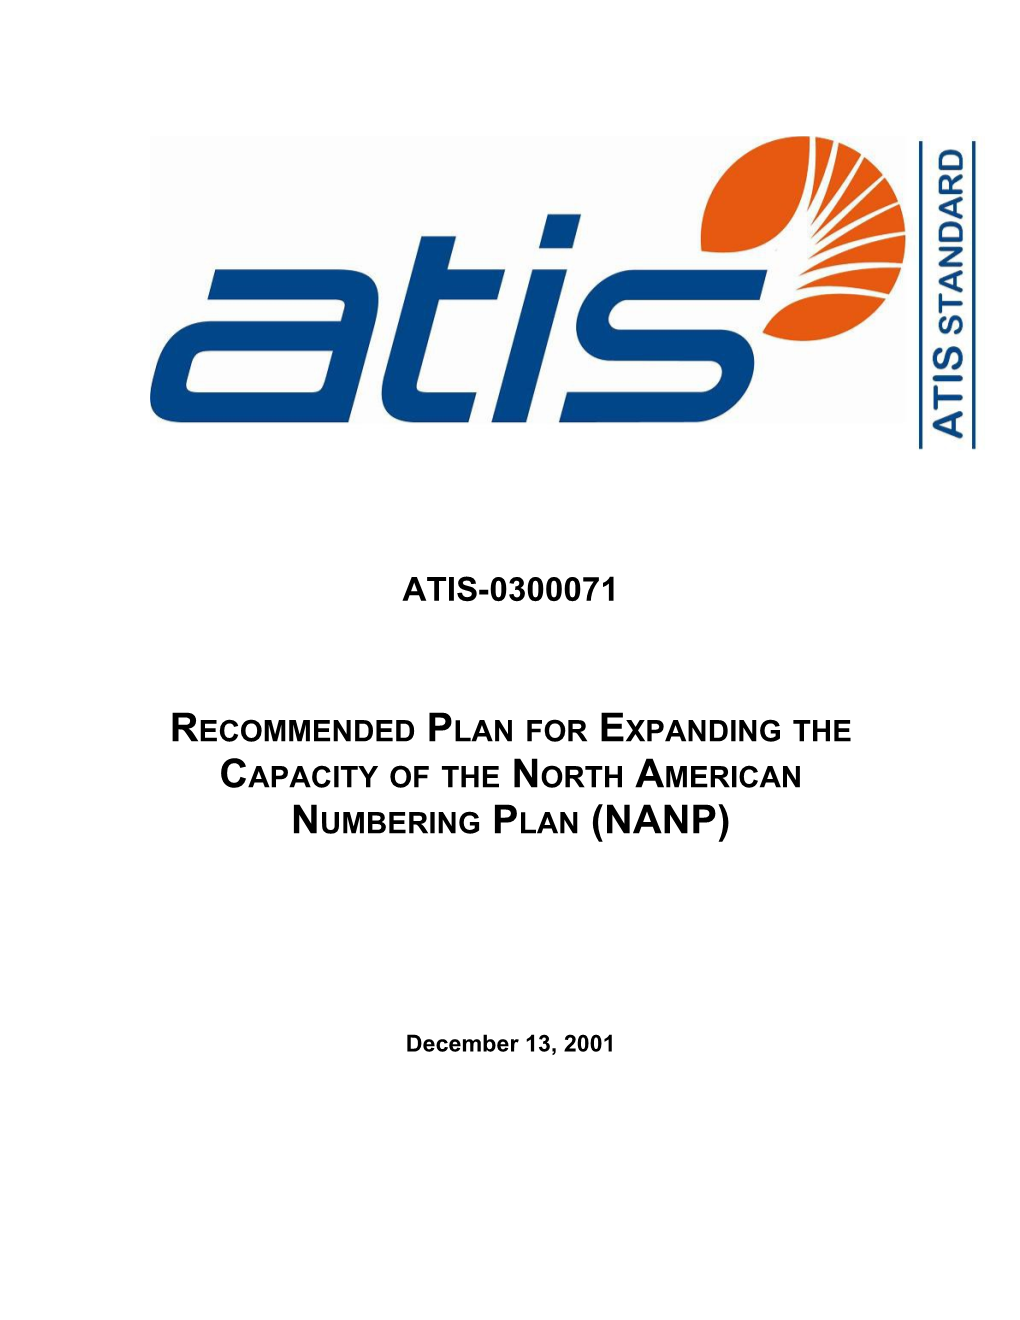 Recommended Plan for Expanding the Capacity of the North American Numbering Plan (NANP)